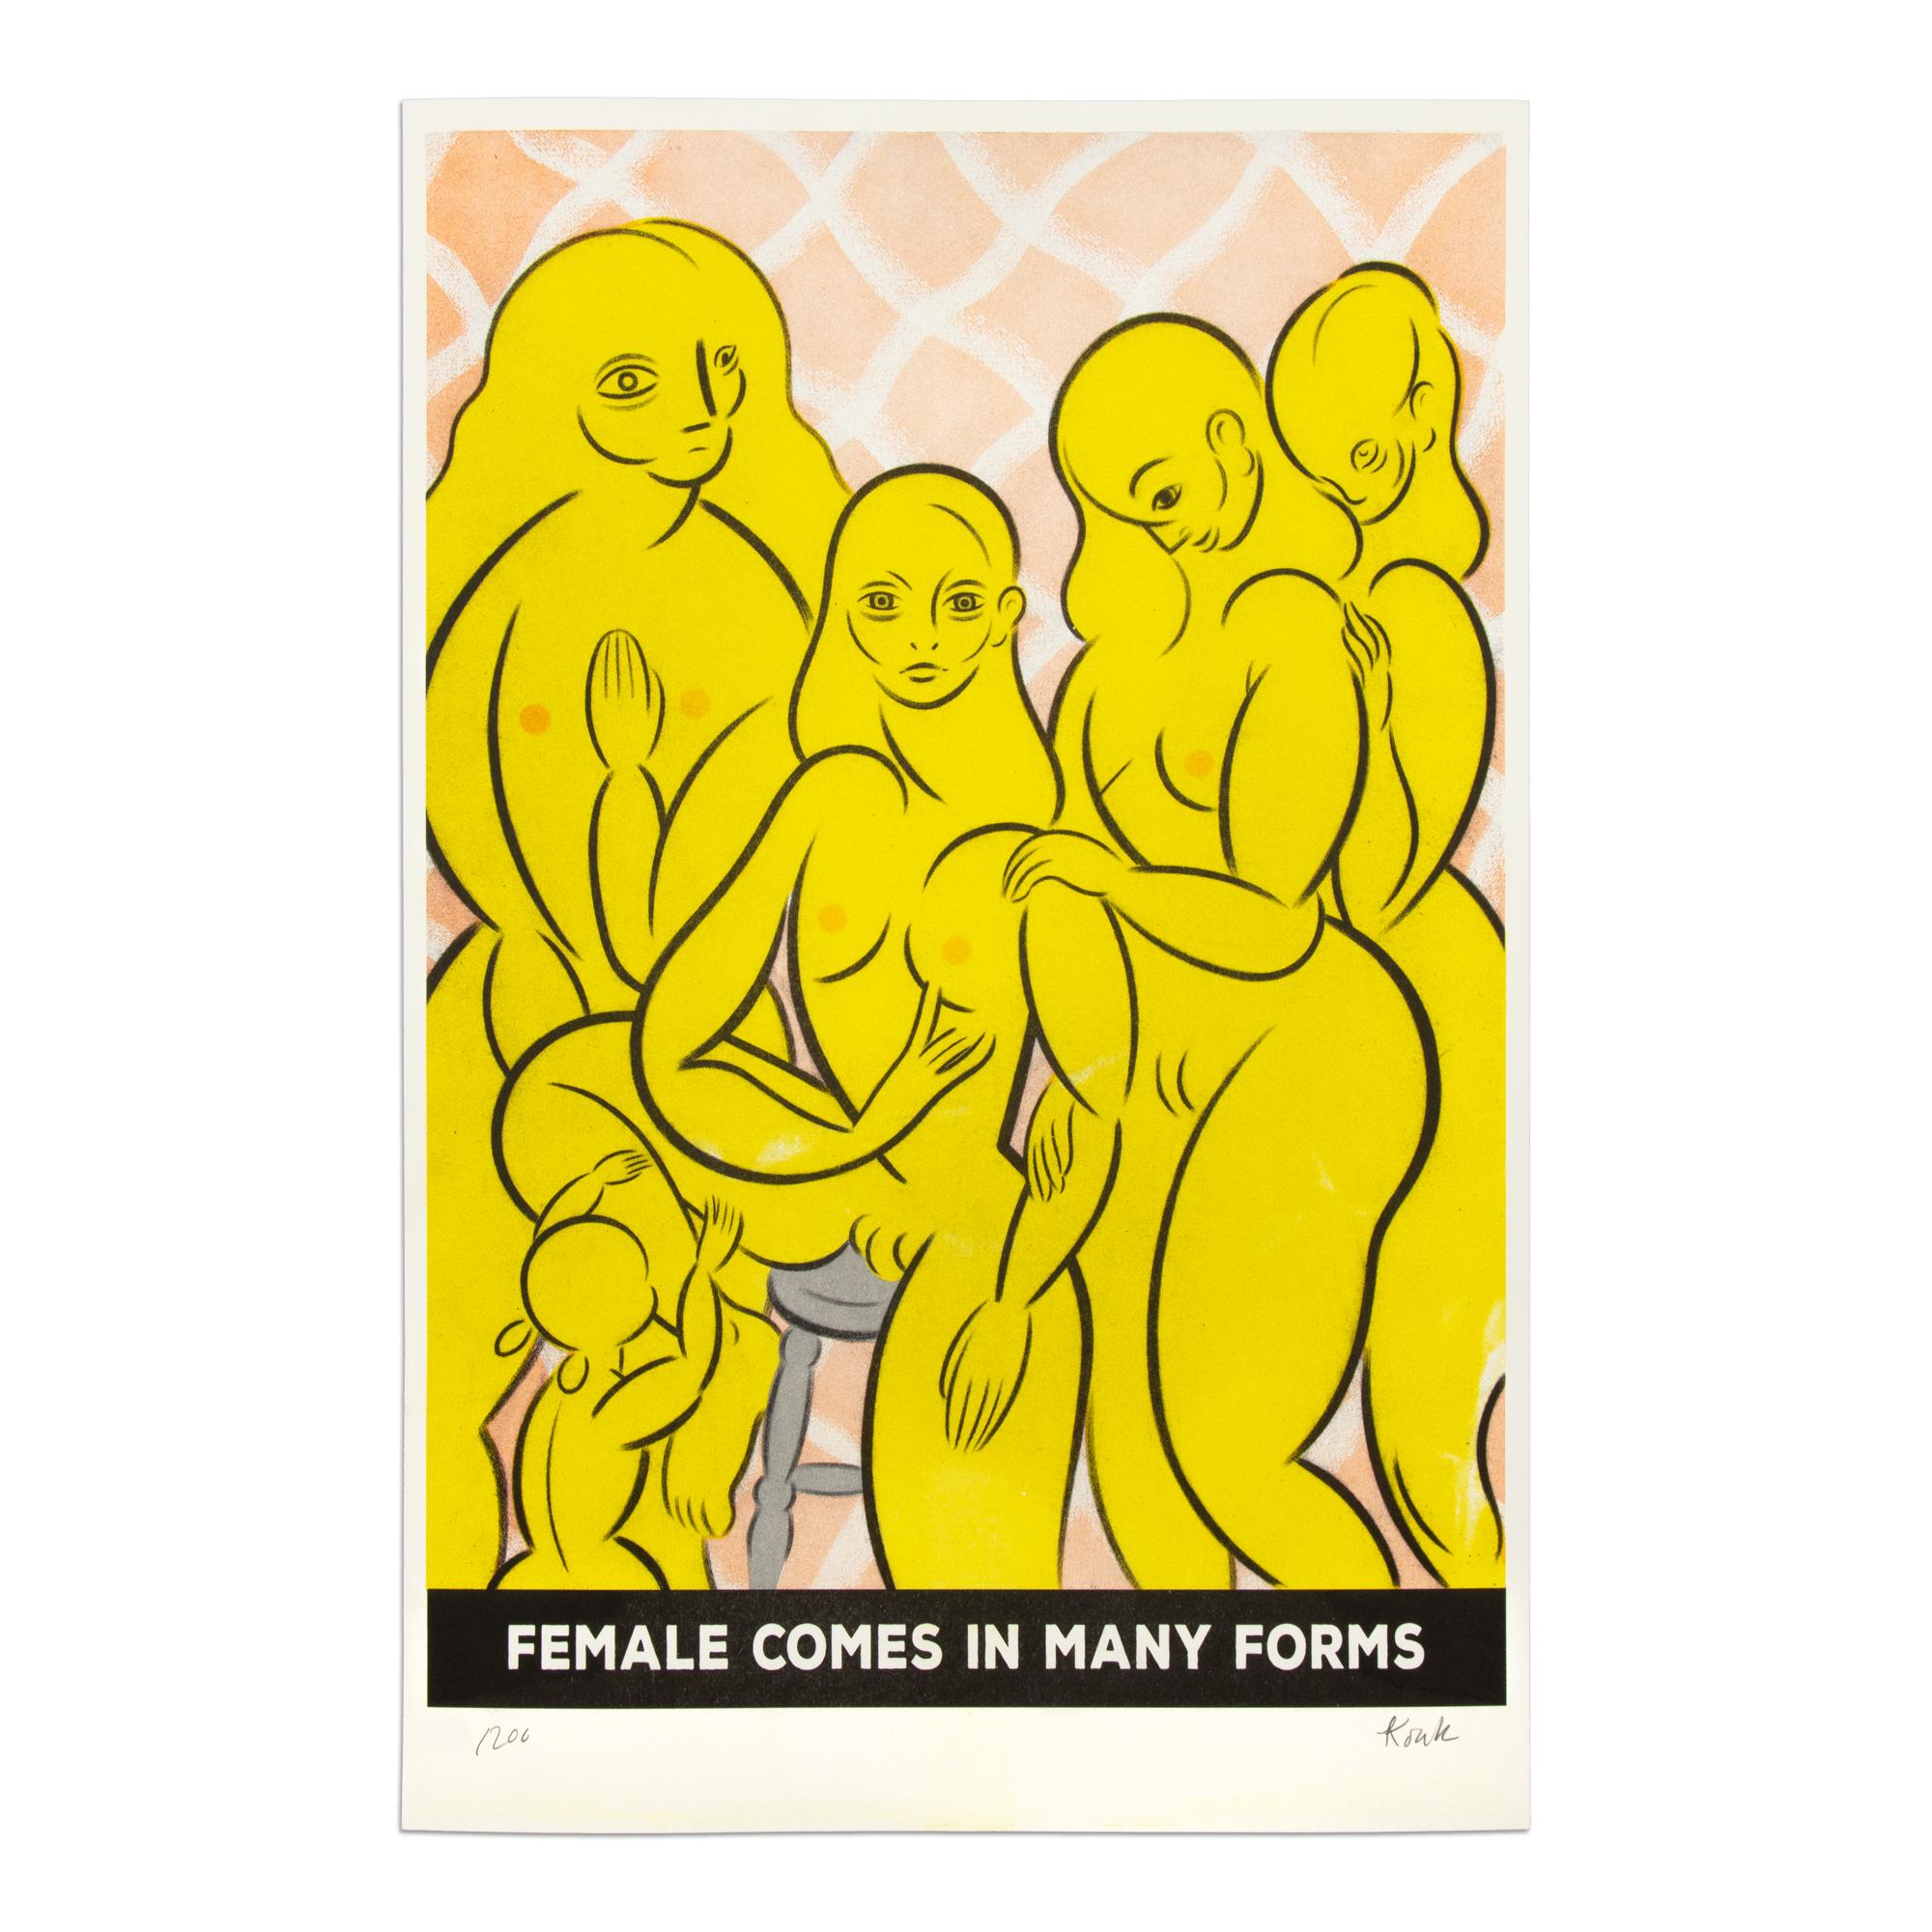 Koak (US American, b. 1981)
Female Comes In Many Forms, 2019
Medium: Five color risograph print
Dimensions: 43 x 28 cm (17 x 11 in)
Edition of 200: Hand numbered and signed
Condition: Mint